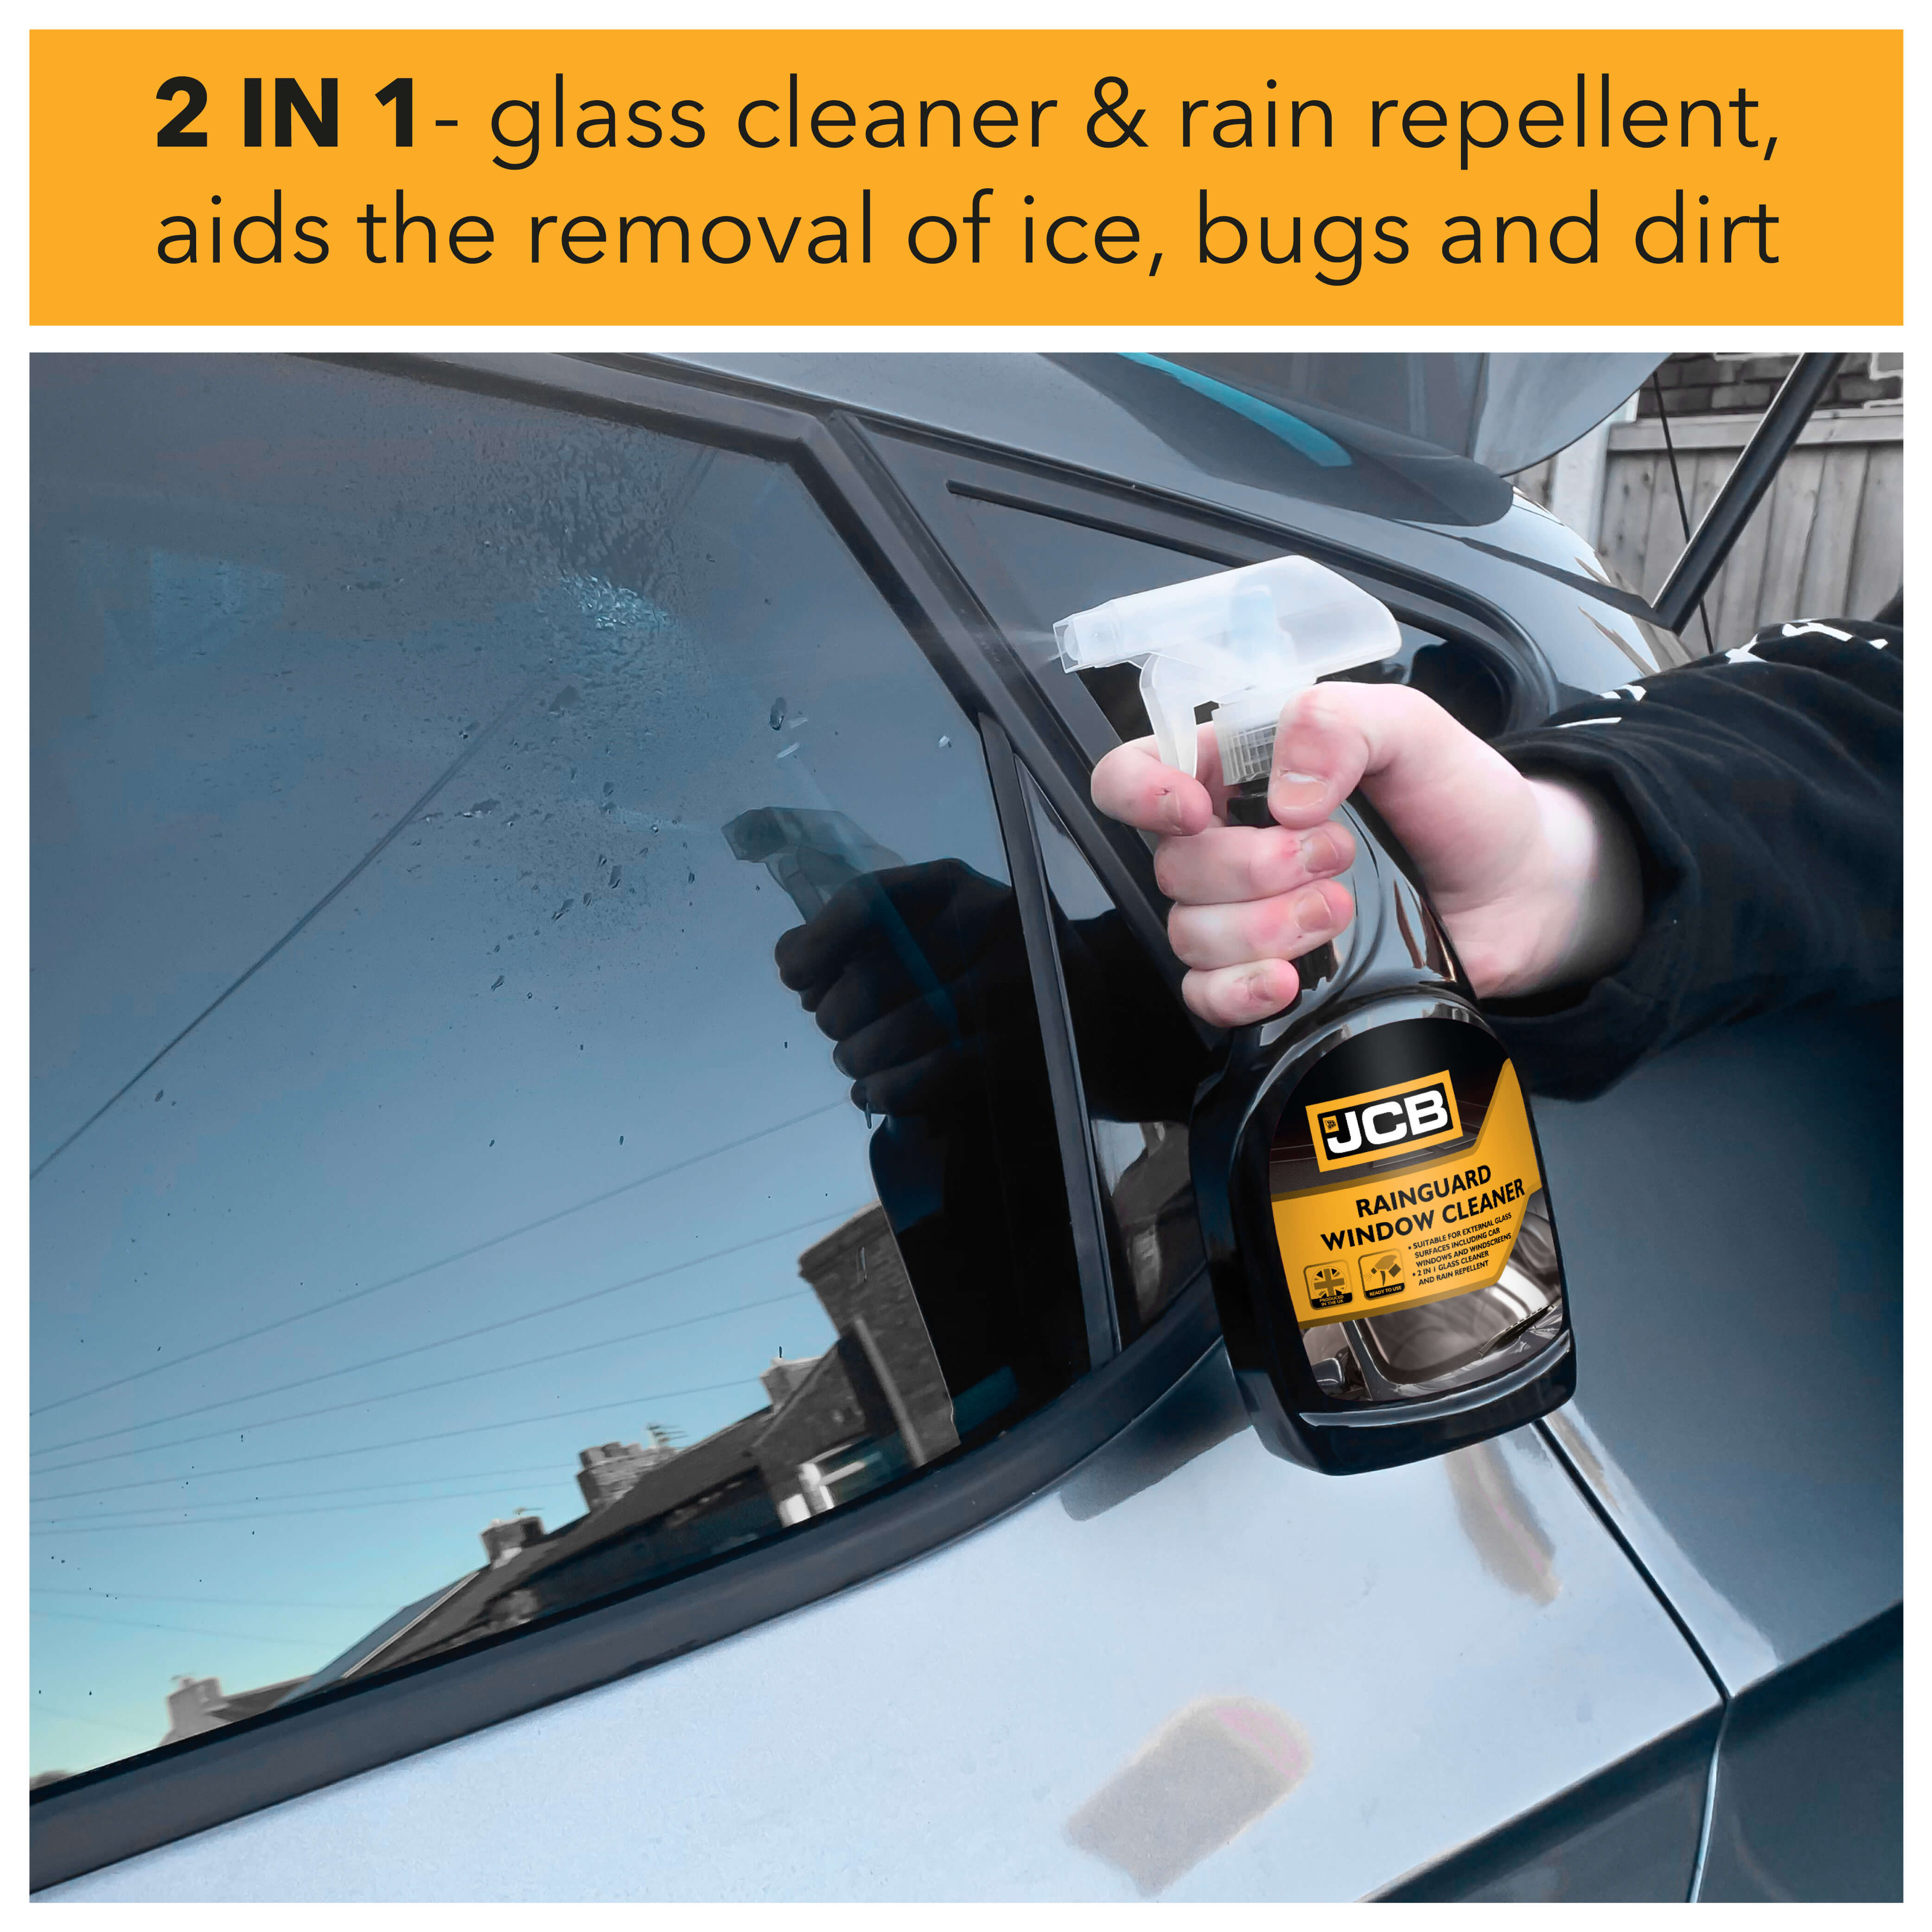 2 in 1 - glass cleaner & rain repellent, aids the removal of ice, bugs and dirt